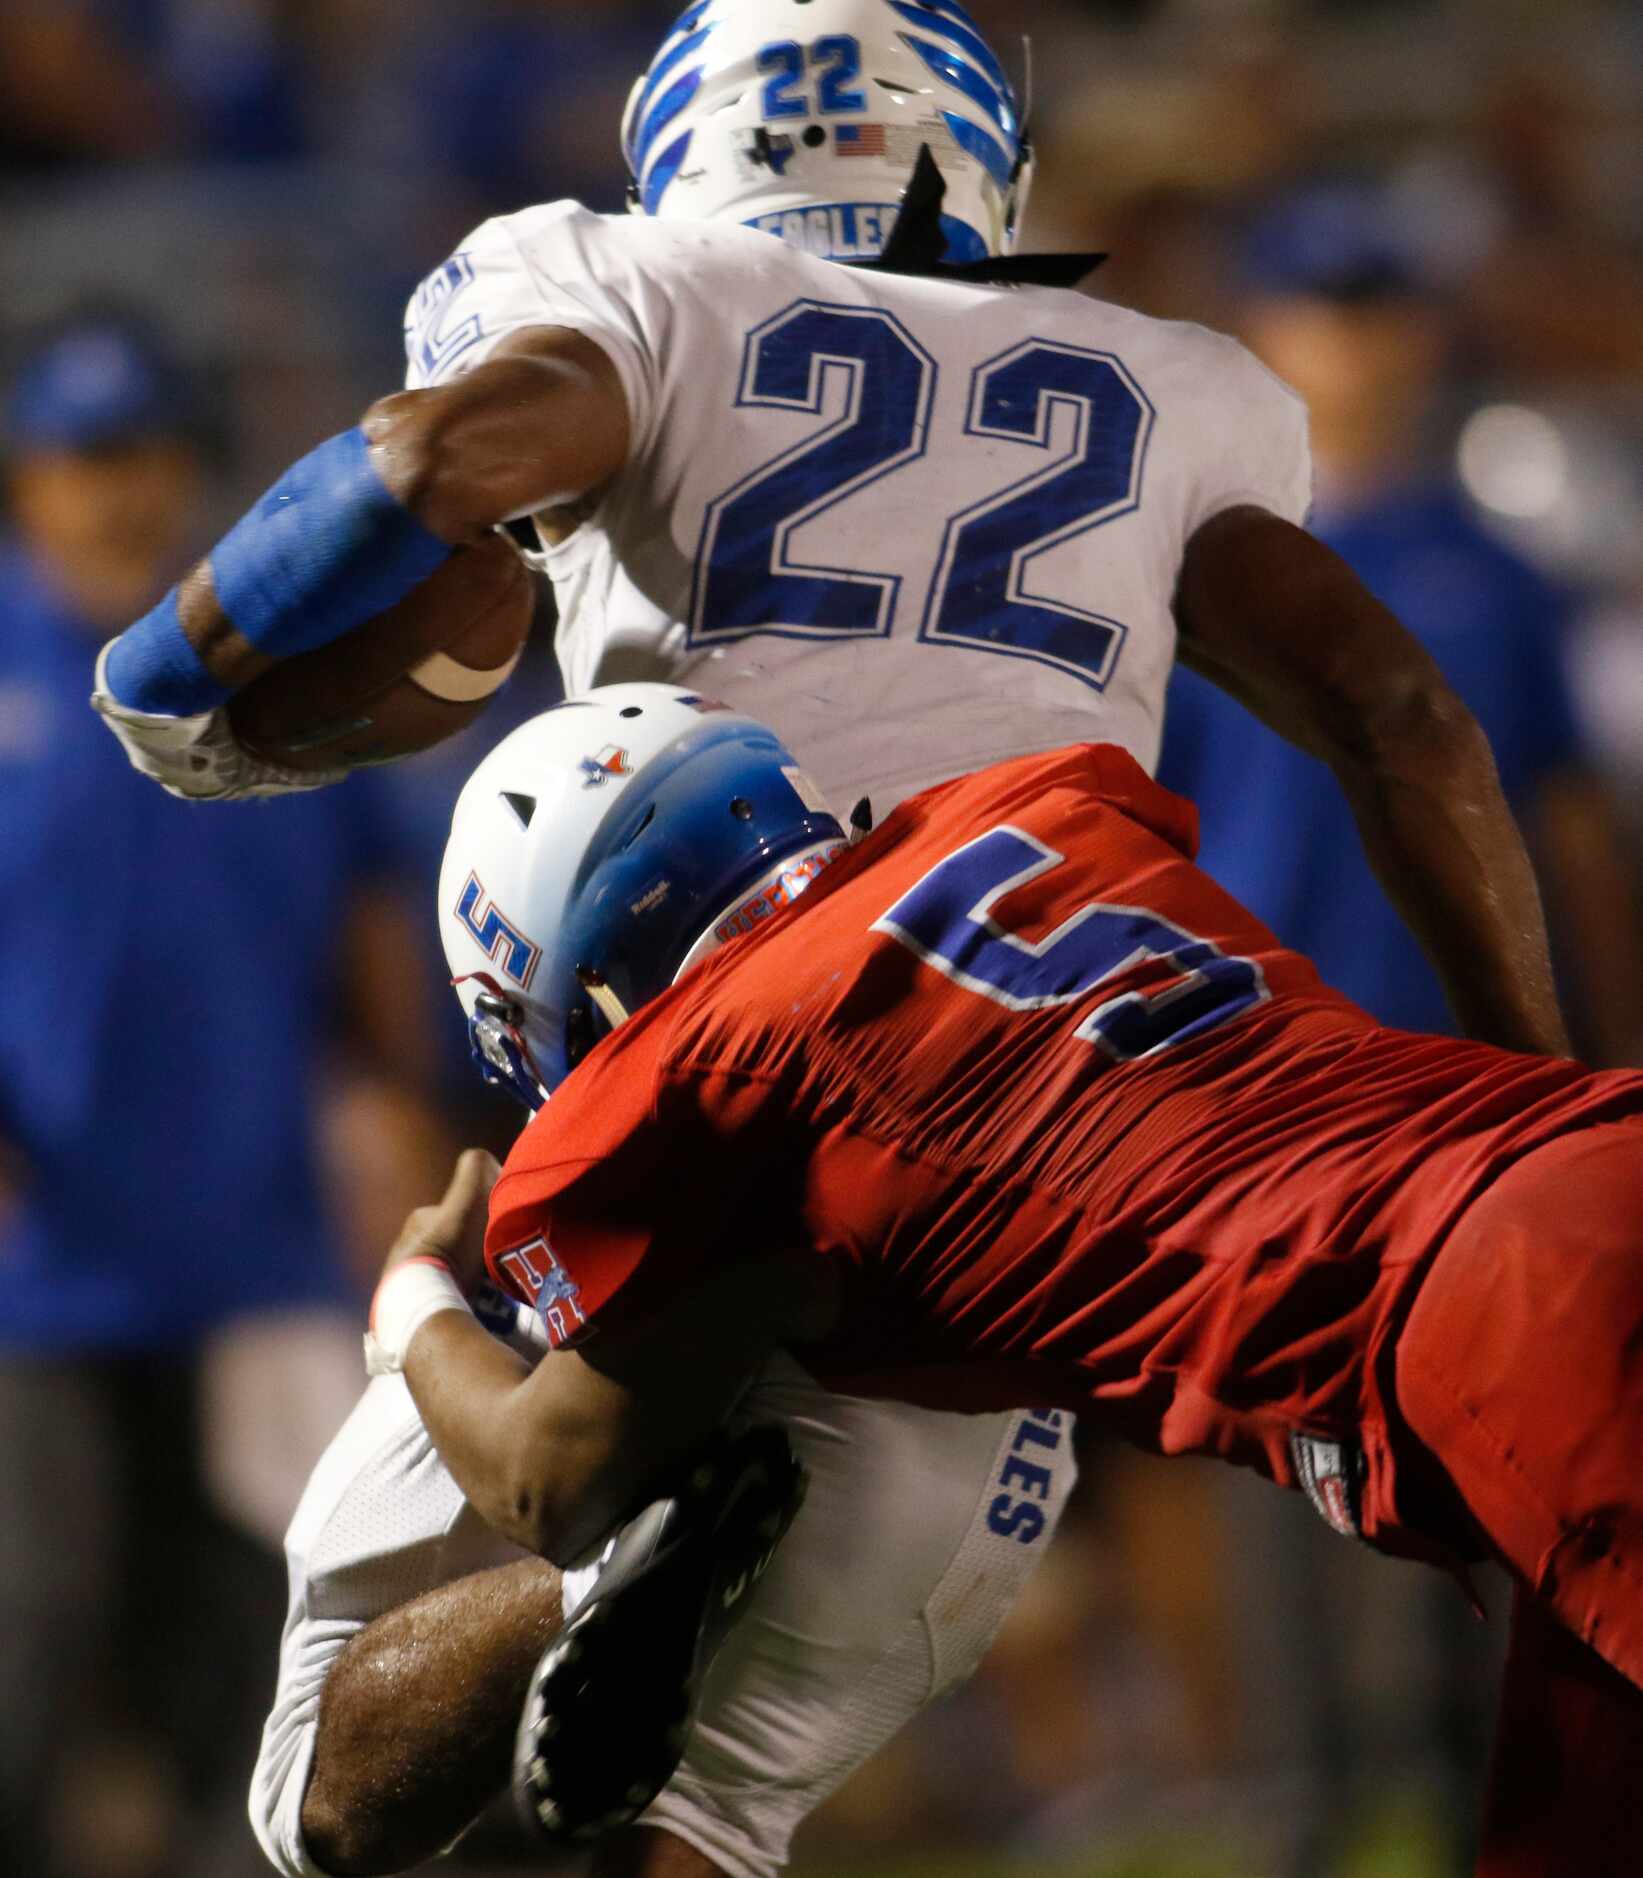 Midlothian Heritage defensive end Damian Alexander (5) dives to stop the progress of Lindale...